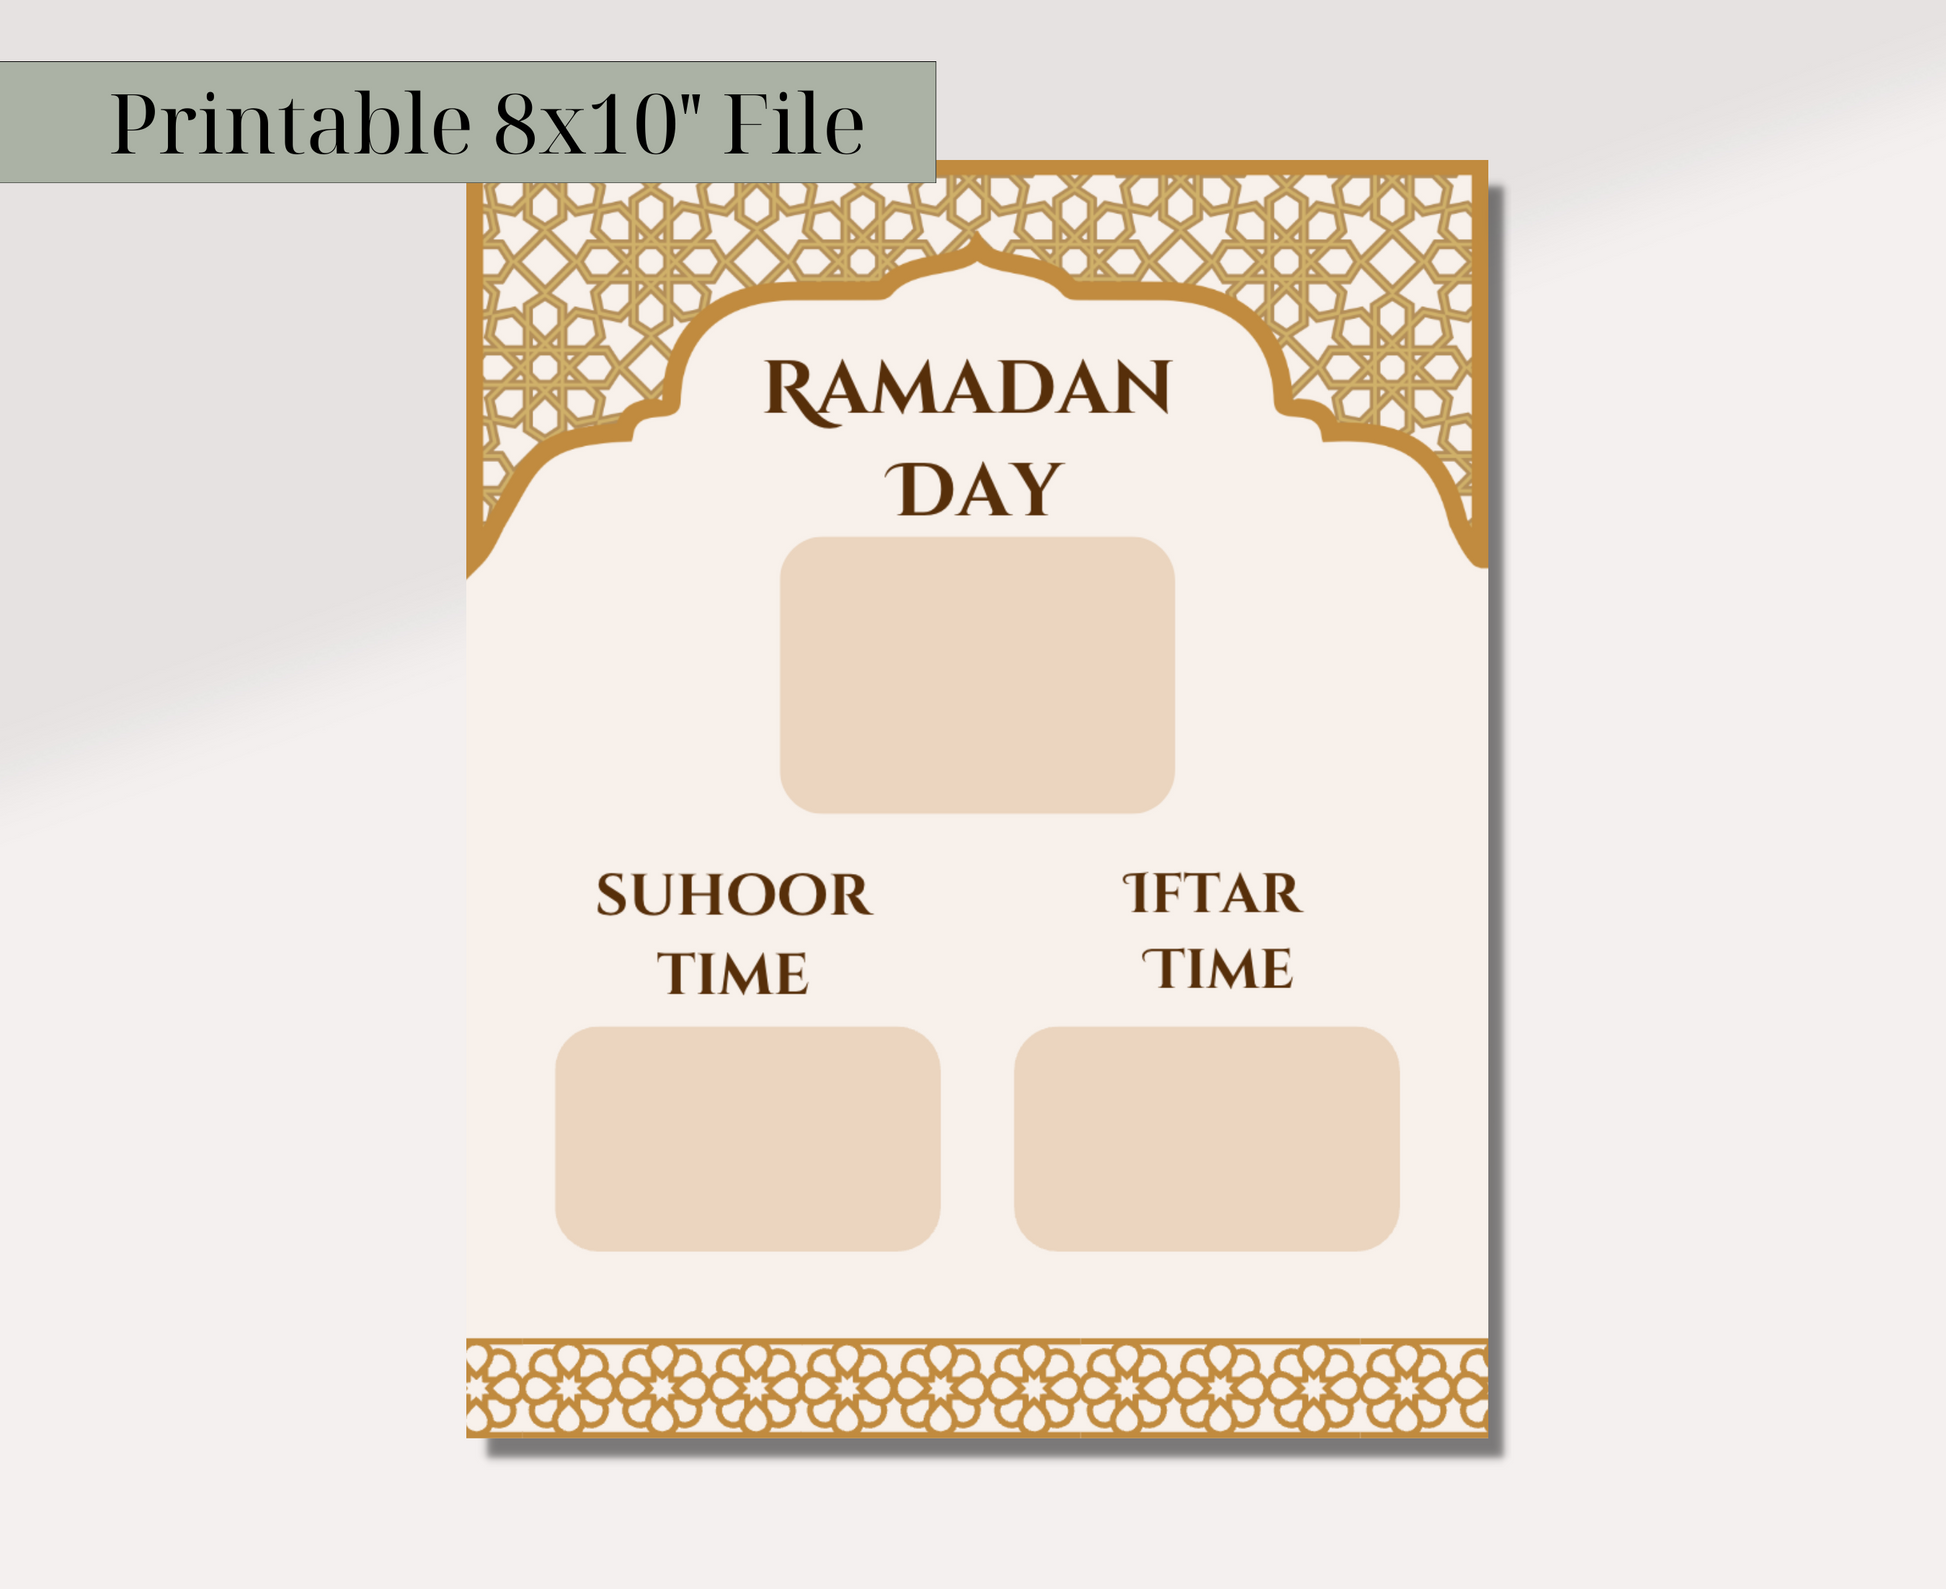 Ramadan Calendar Tracker print displayed on a wooden background. It has Ramadan Day, Suhoor Time, and Iftar Time.